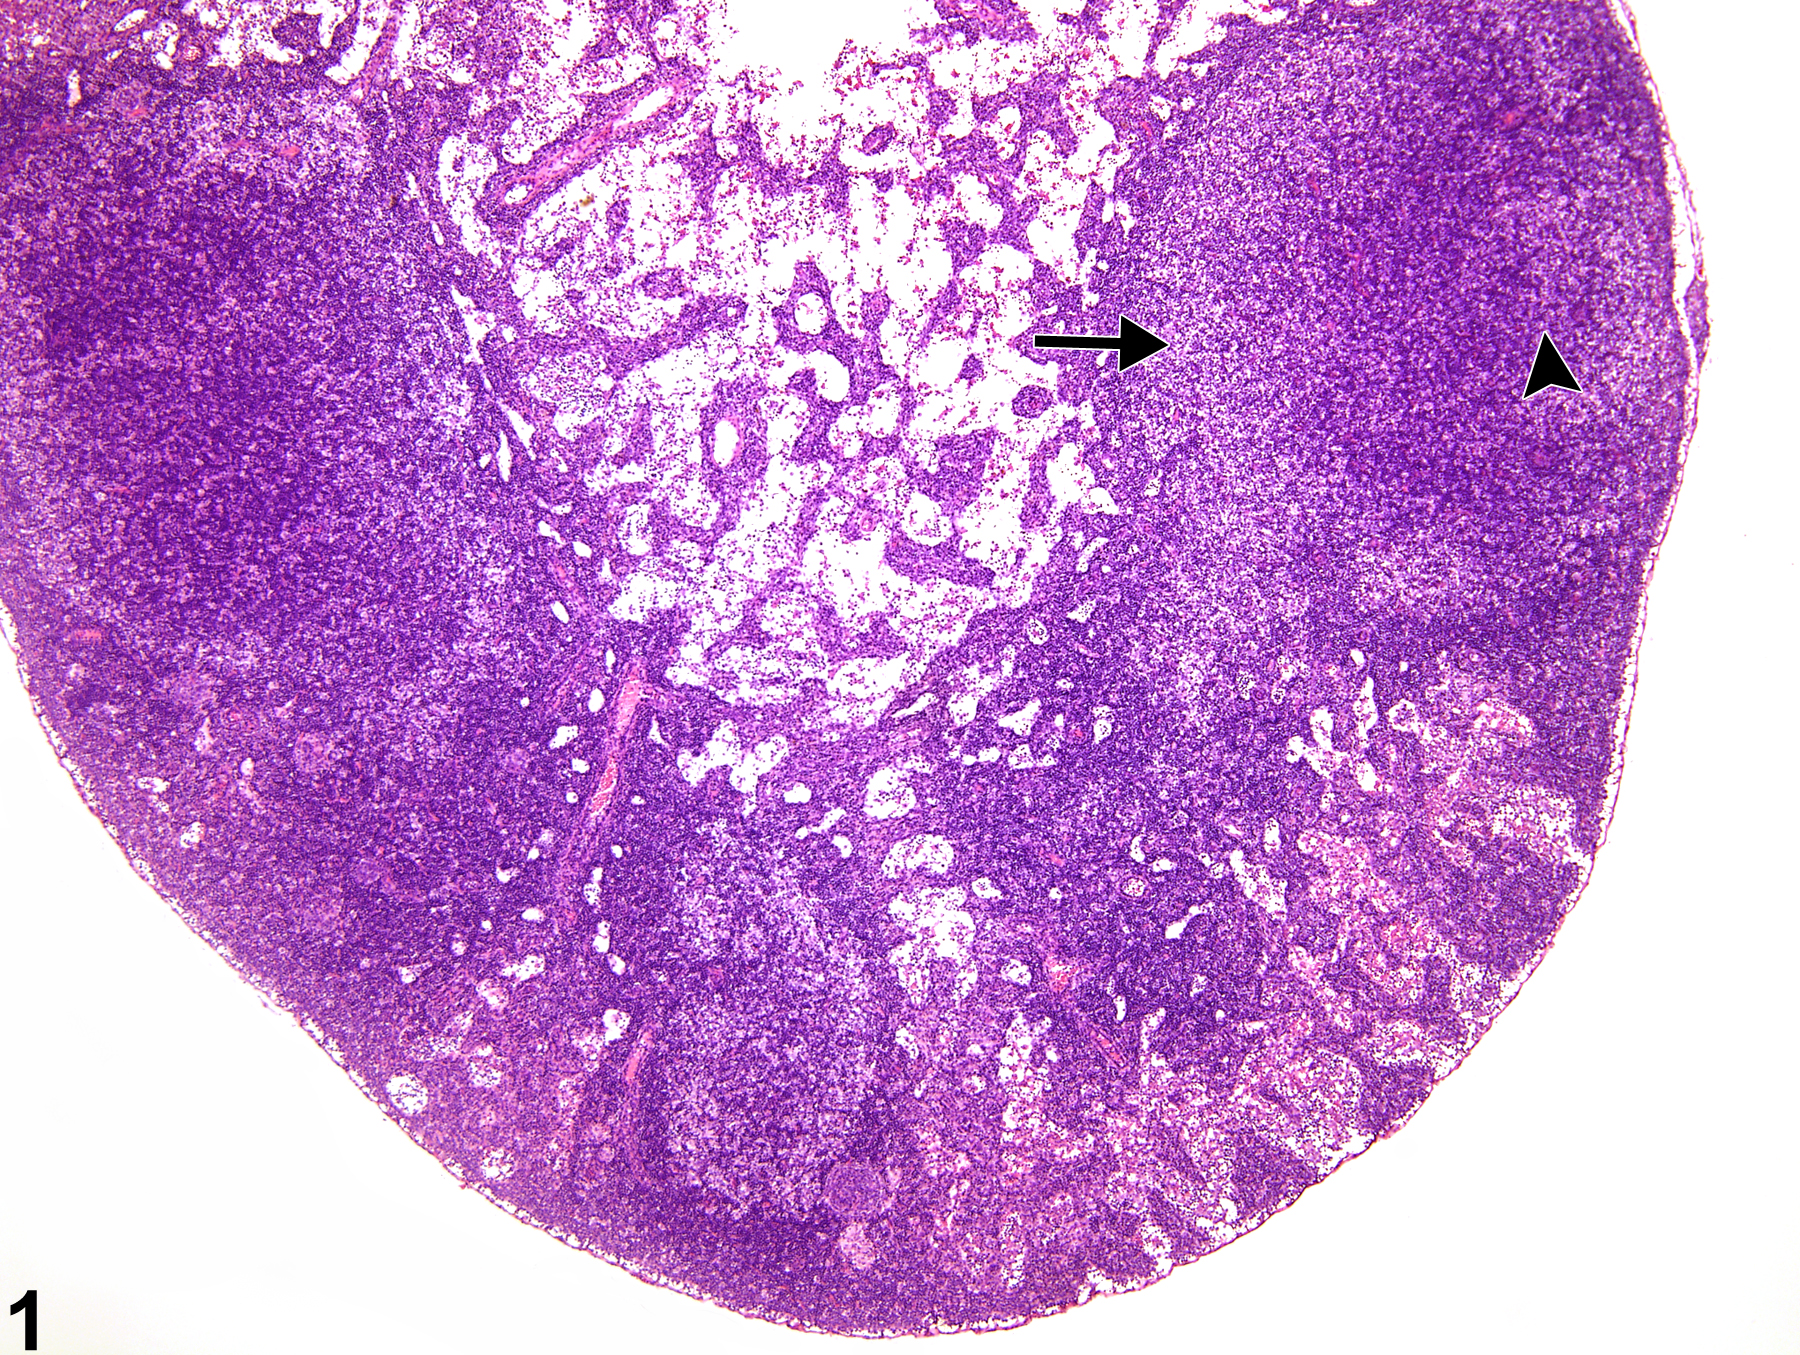 Image of atrophy in the lymph node from a female F344/N rat in a subchronic study